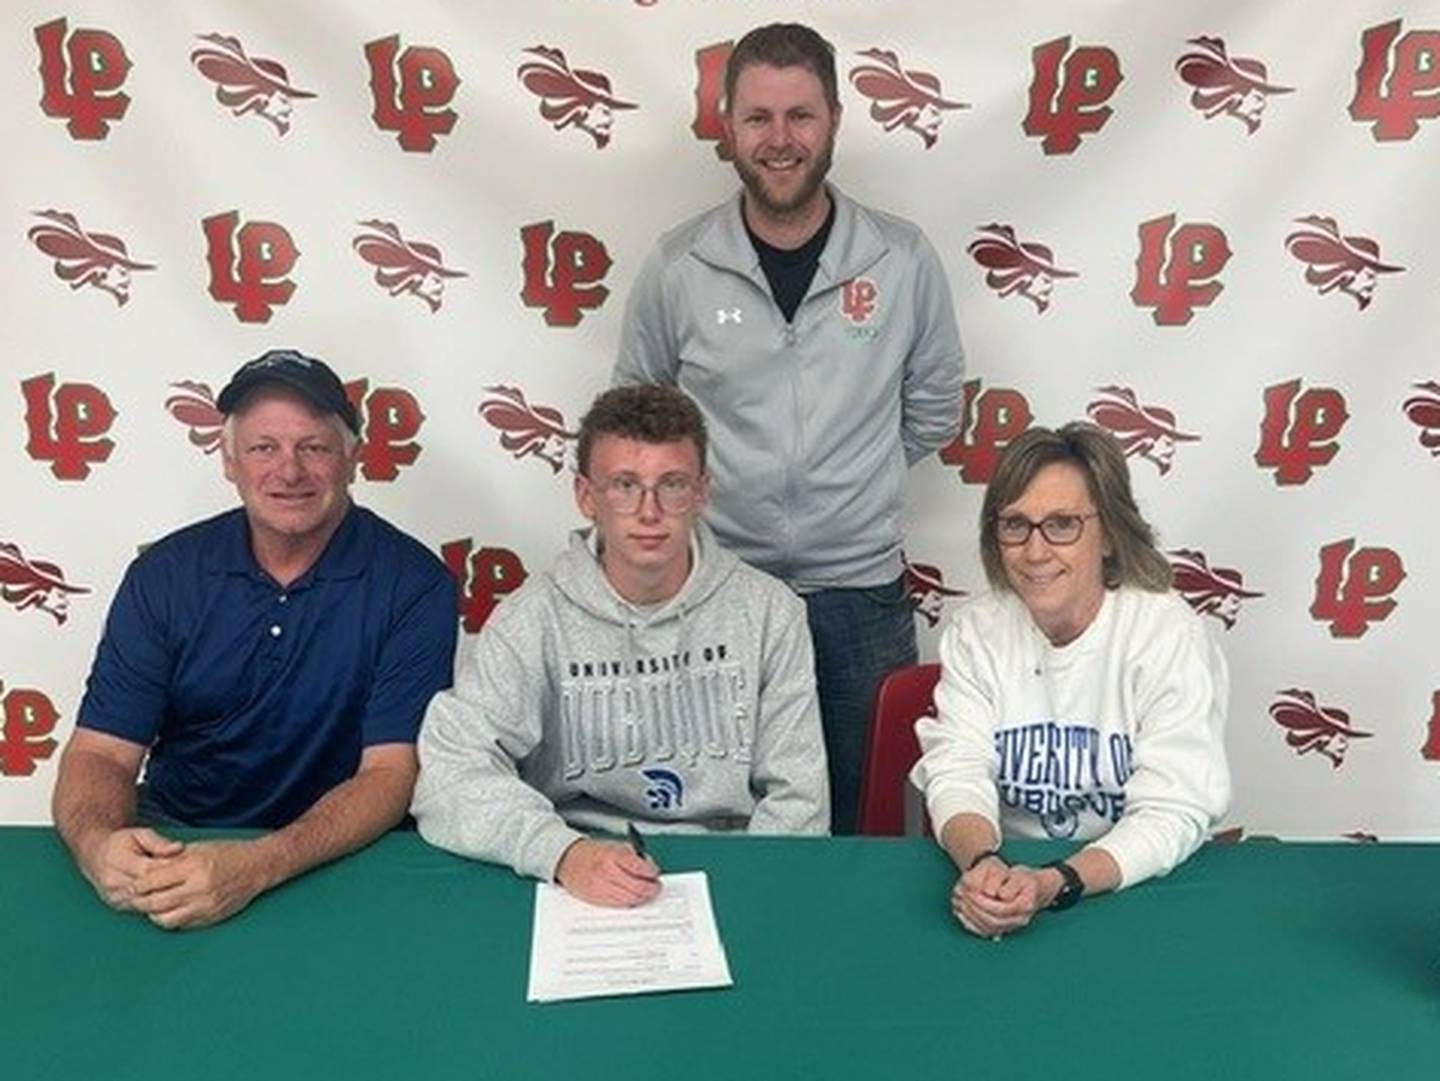 La Salle-Peru senior Andrew Bollis (seated, center) committed to play tennis at the University of Dubuque. He was joined by his parents (seated), Don and Jill, and L-P coach Aaron Guenther.